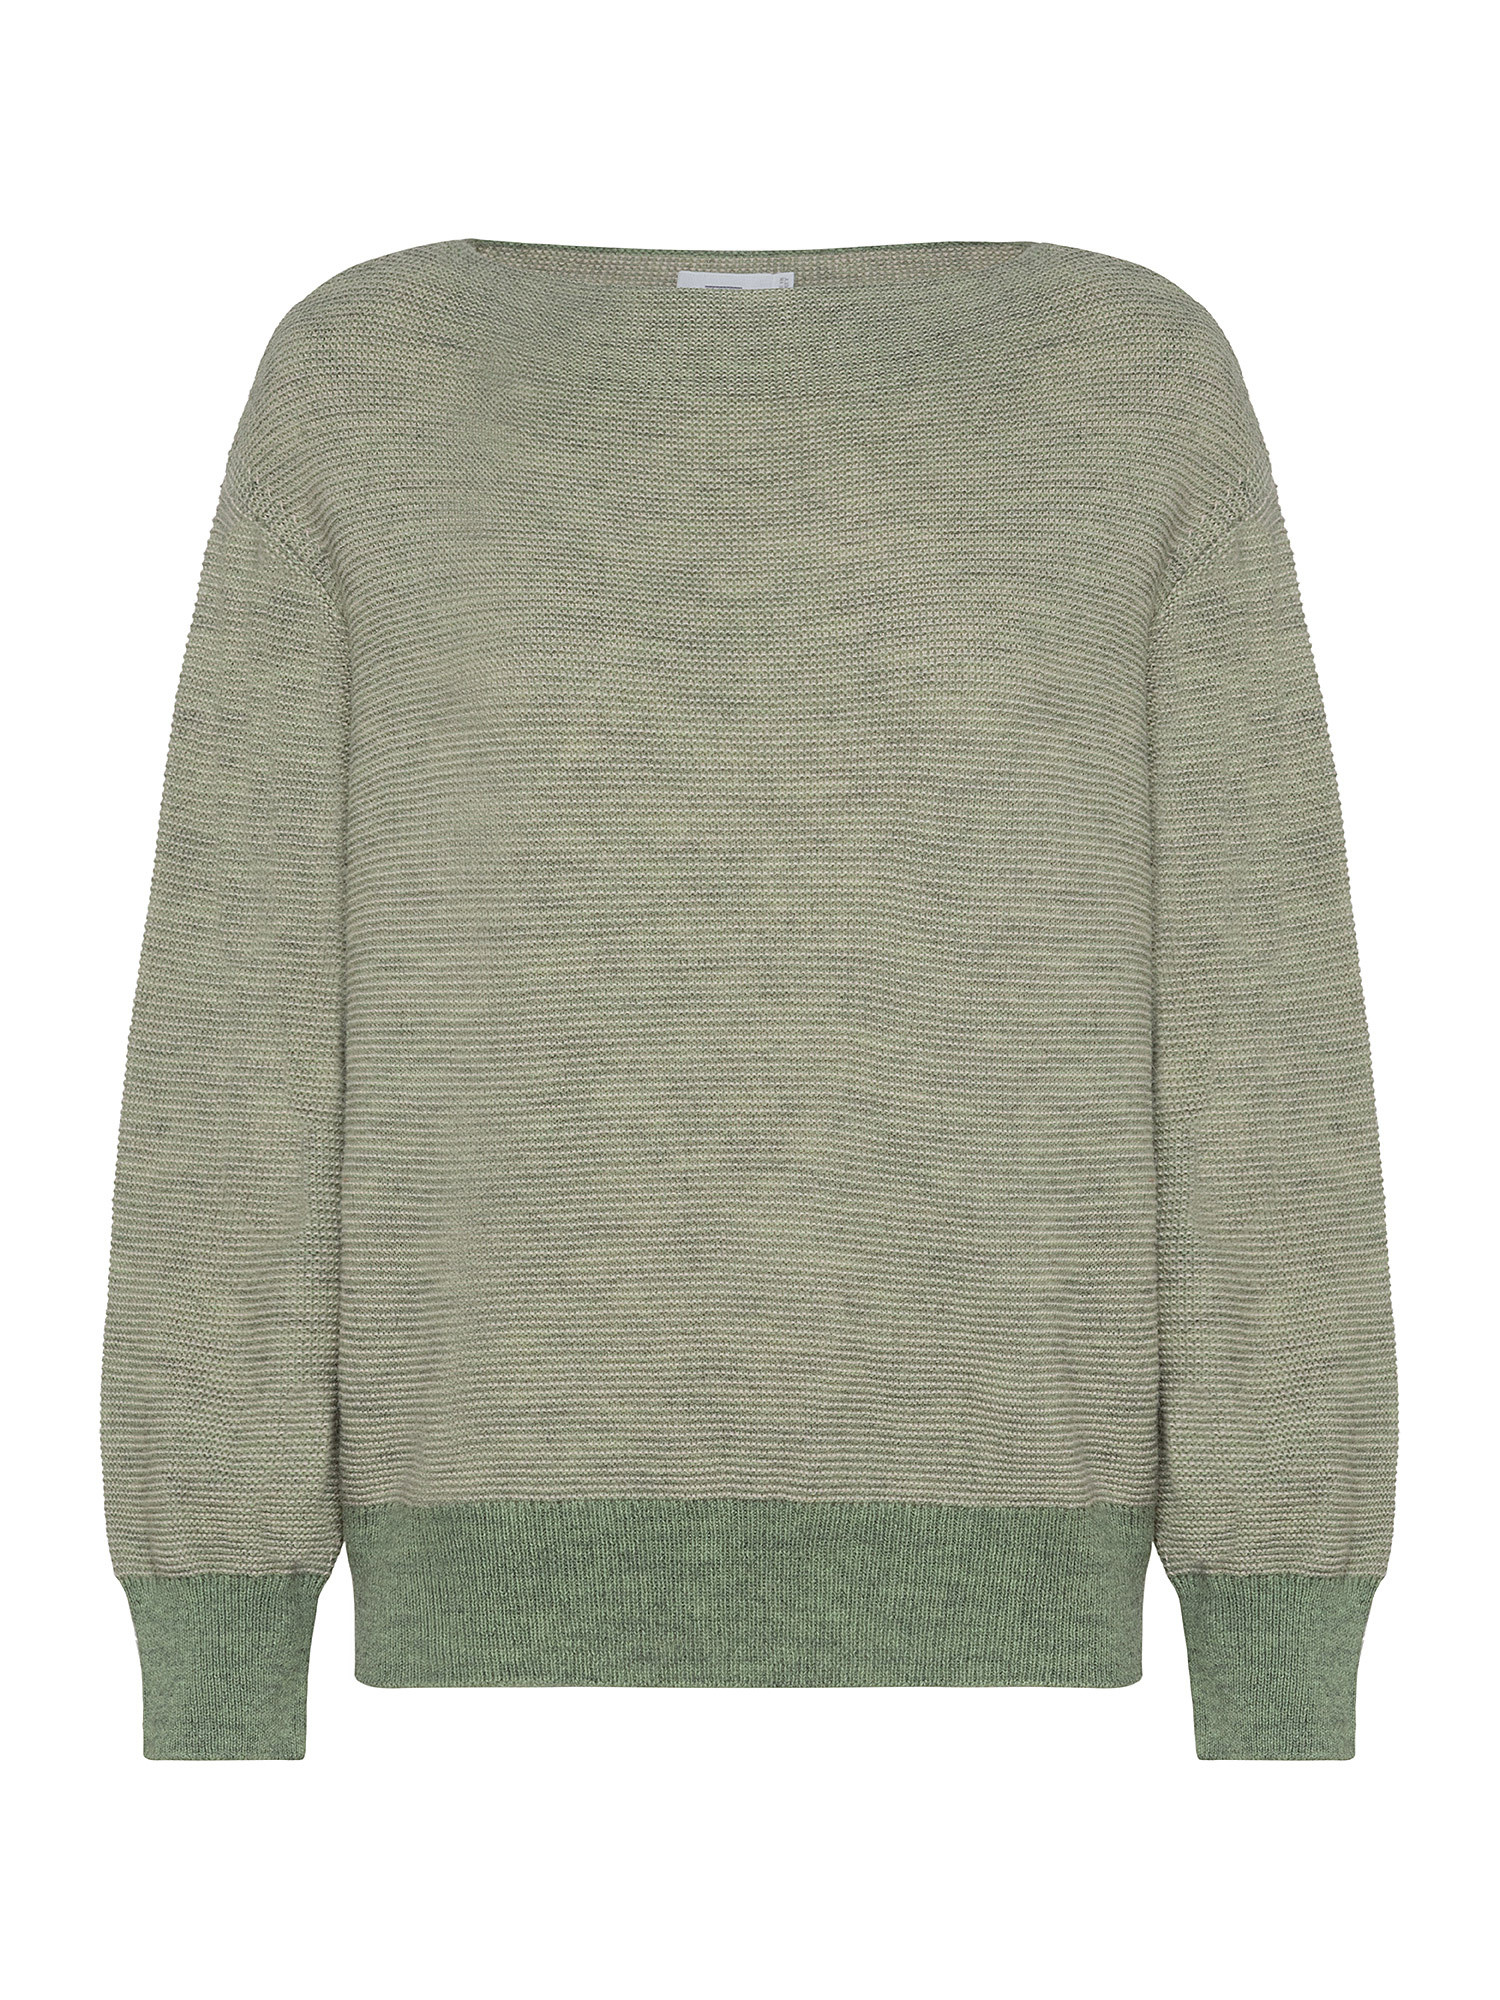 Two Tone Sweater, Green, large image number 0